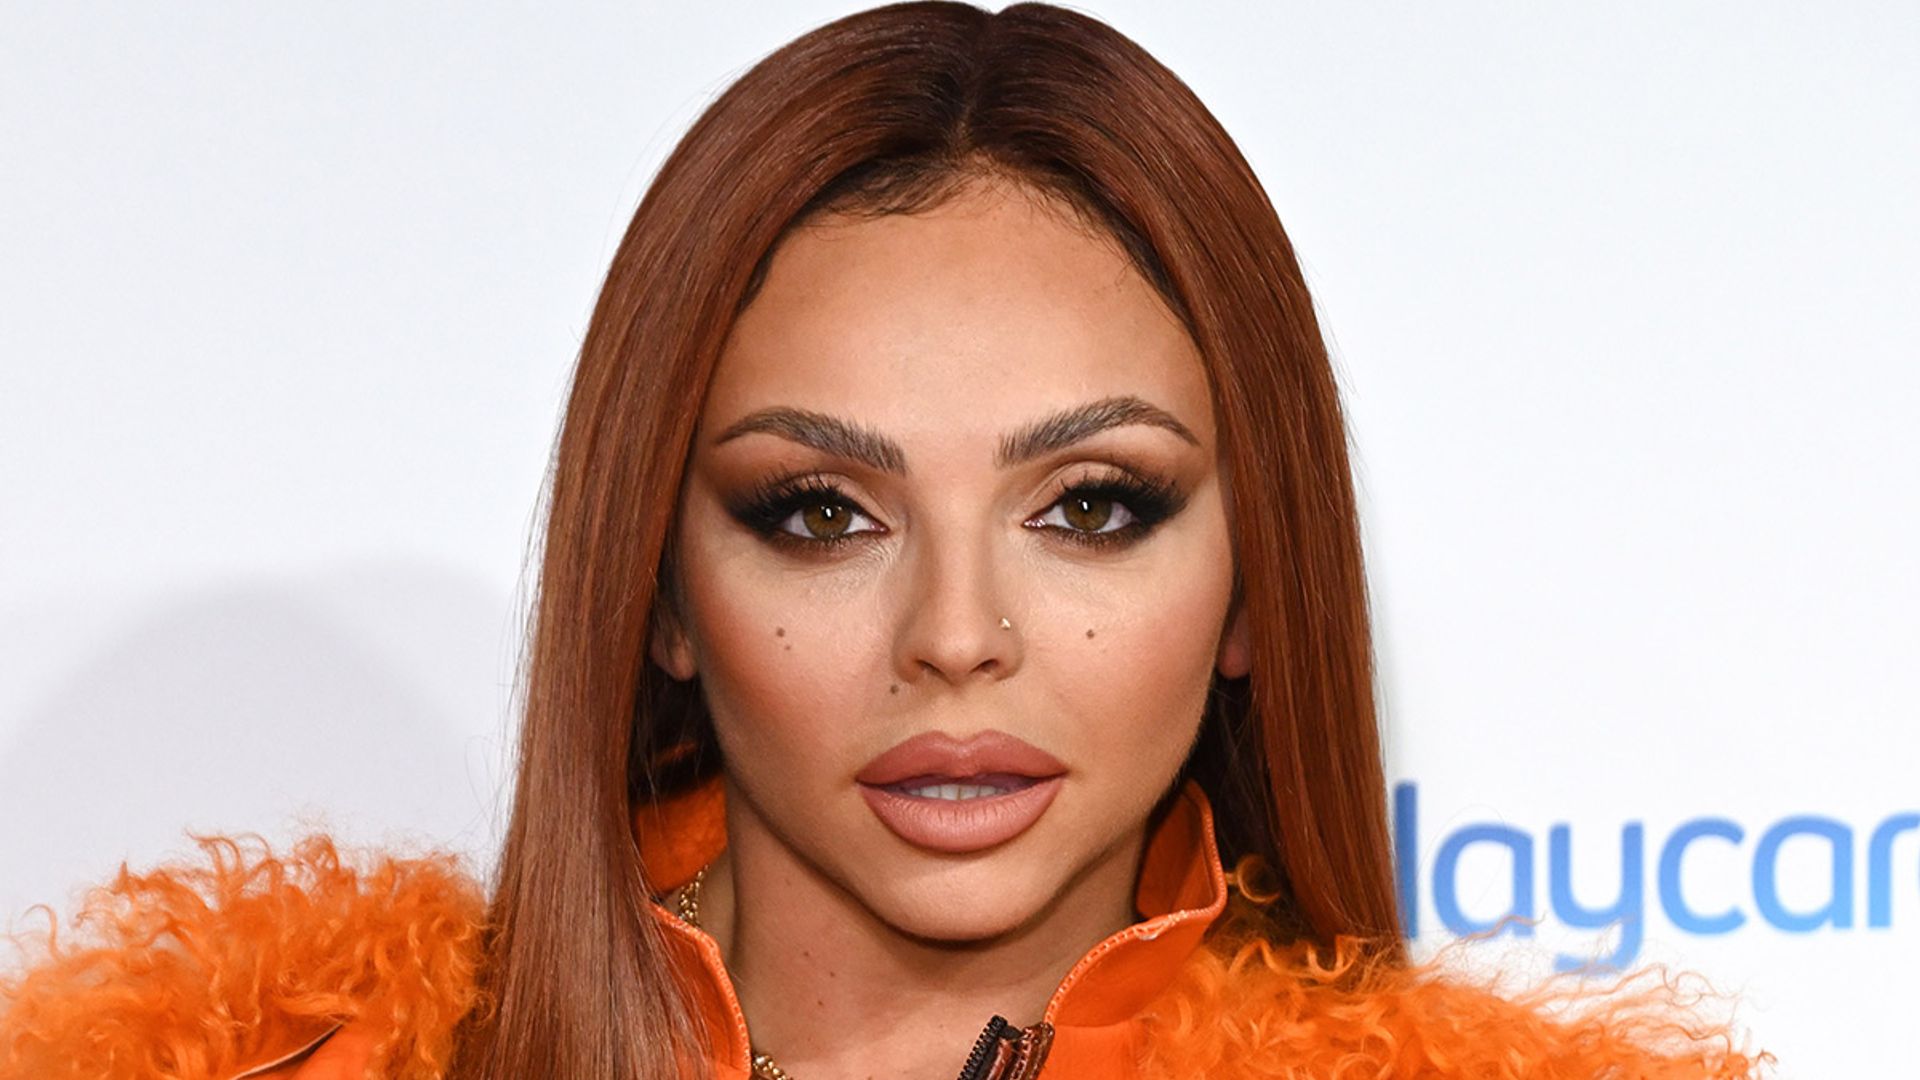 Jesy Nelson drives fans wild as she poses in her underwear